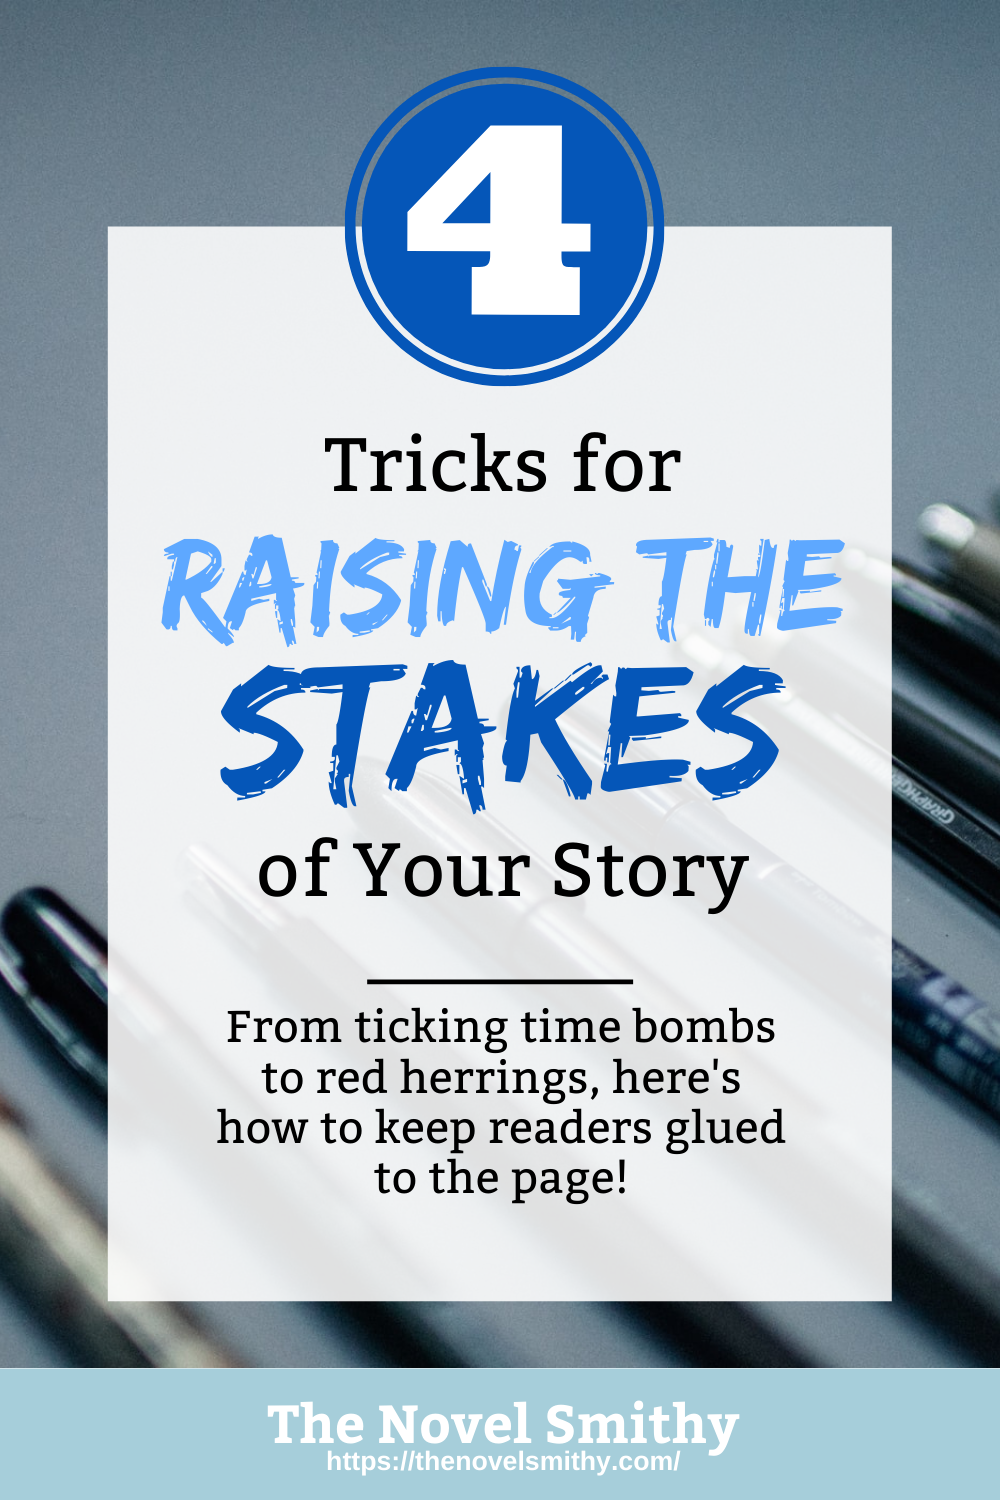 4 Tricks for Raising the Stakes of Your Story